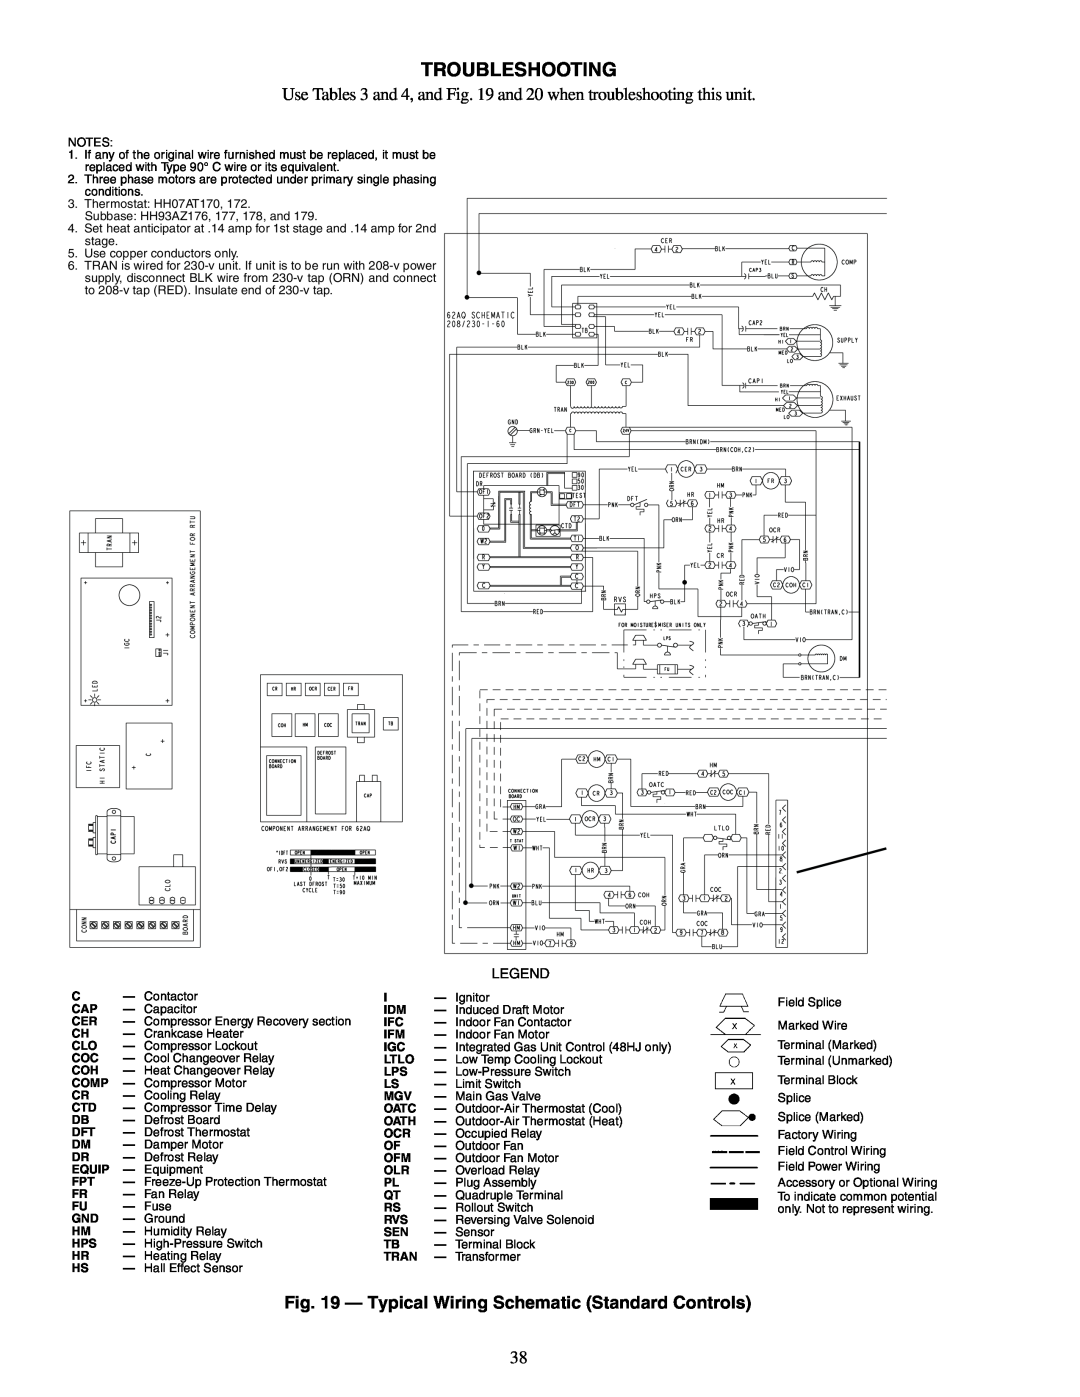 Carrier 48/50HJ004-014 specifications Troubleshooting 